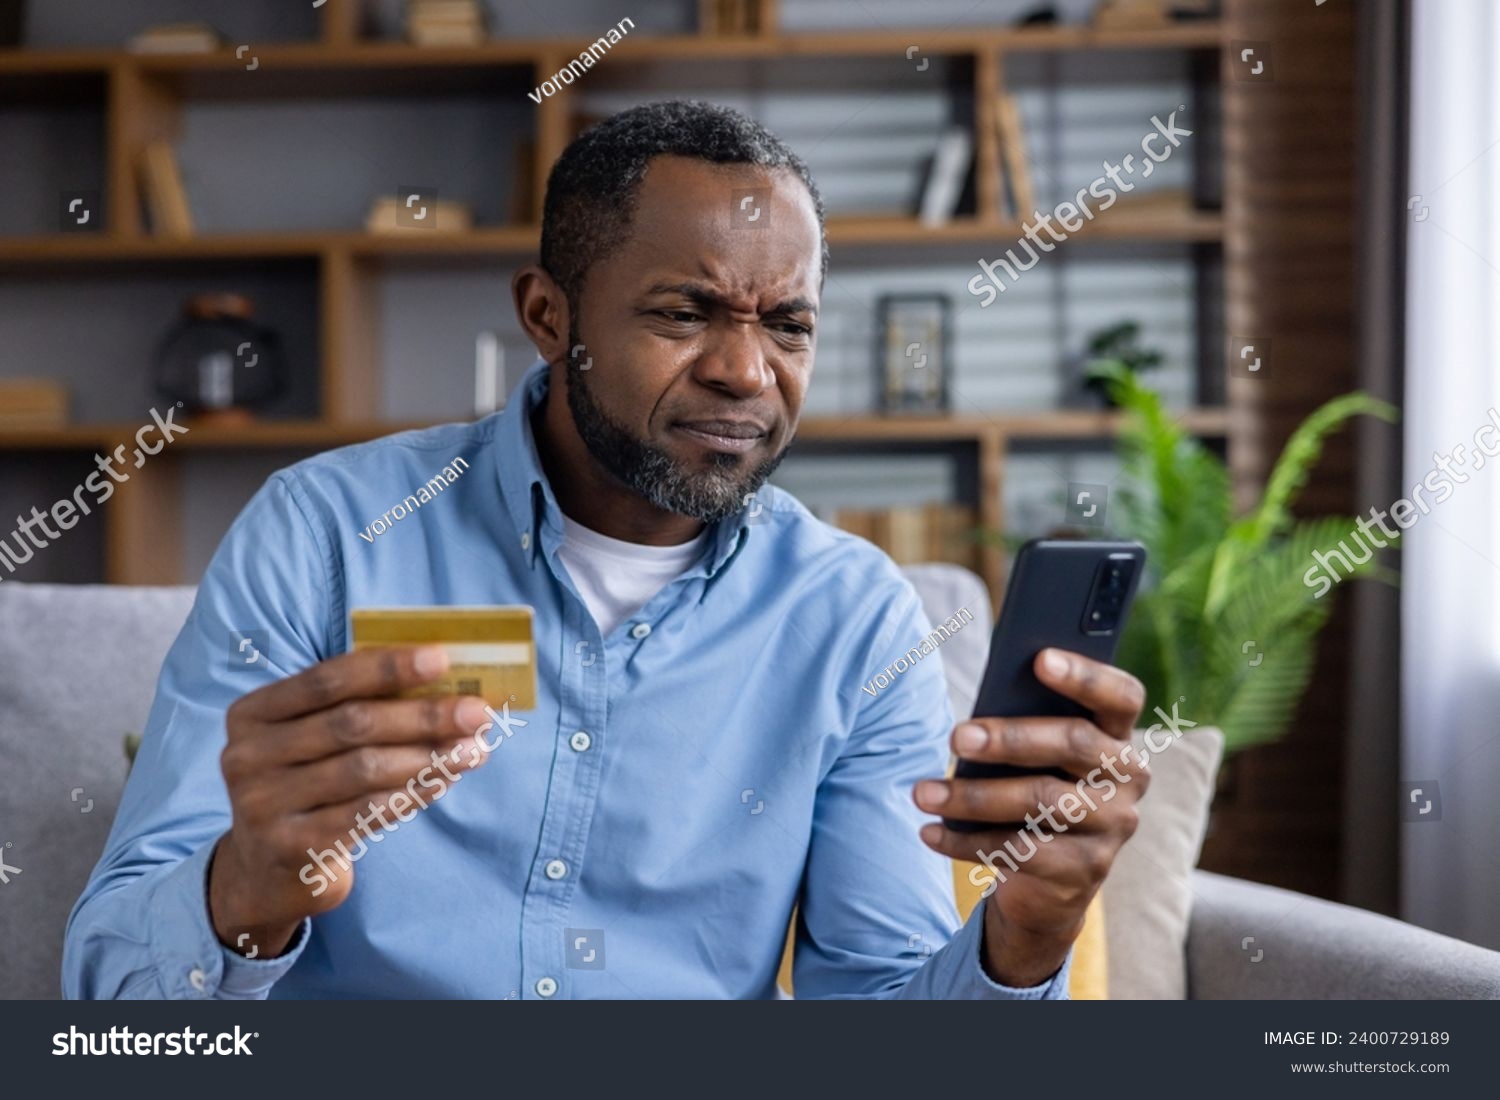 Upset and sad man sitting at home on couch in living room, cheated senior mature african american man displeased holding phone and bank credit card, rejected fund transfer error, account block. #2400729189